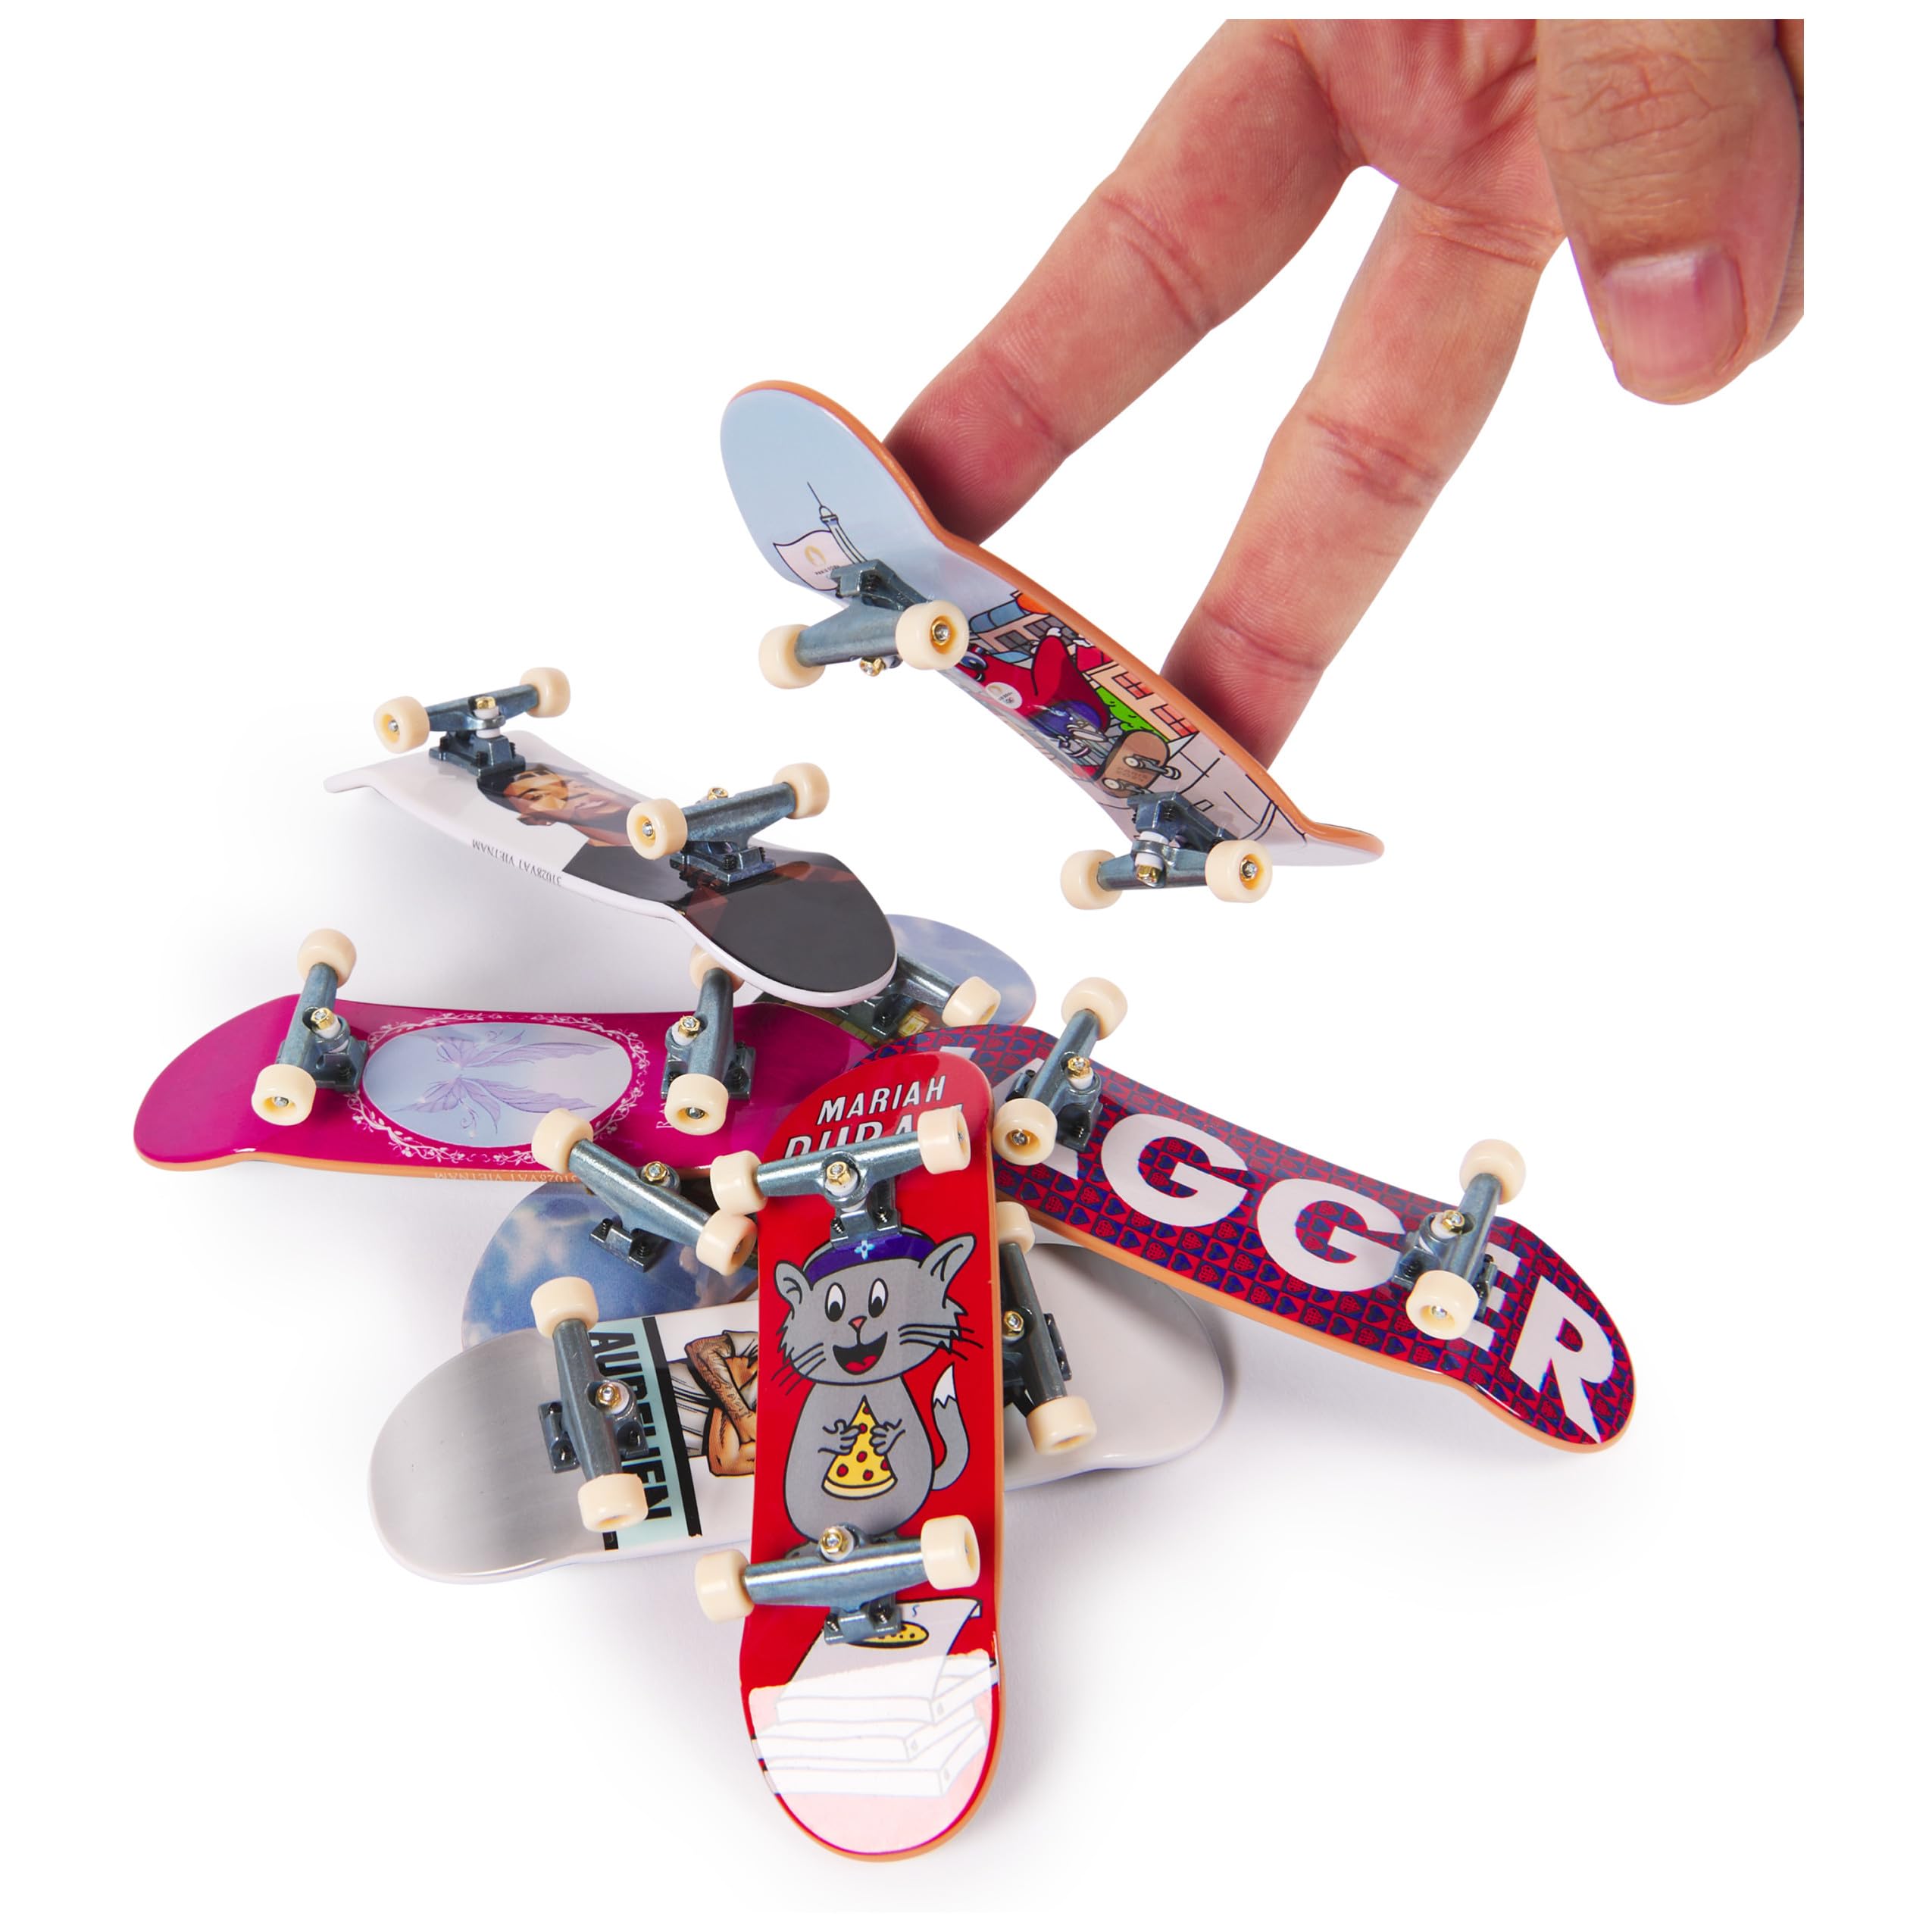 Tech Deck, Competition Legends 8-Pack Fingerboards with Collectible Cards, Olympic Games Paris 2024, Customizable Mini Skateboards, Kids Toys for Ages 6 and up